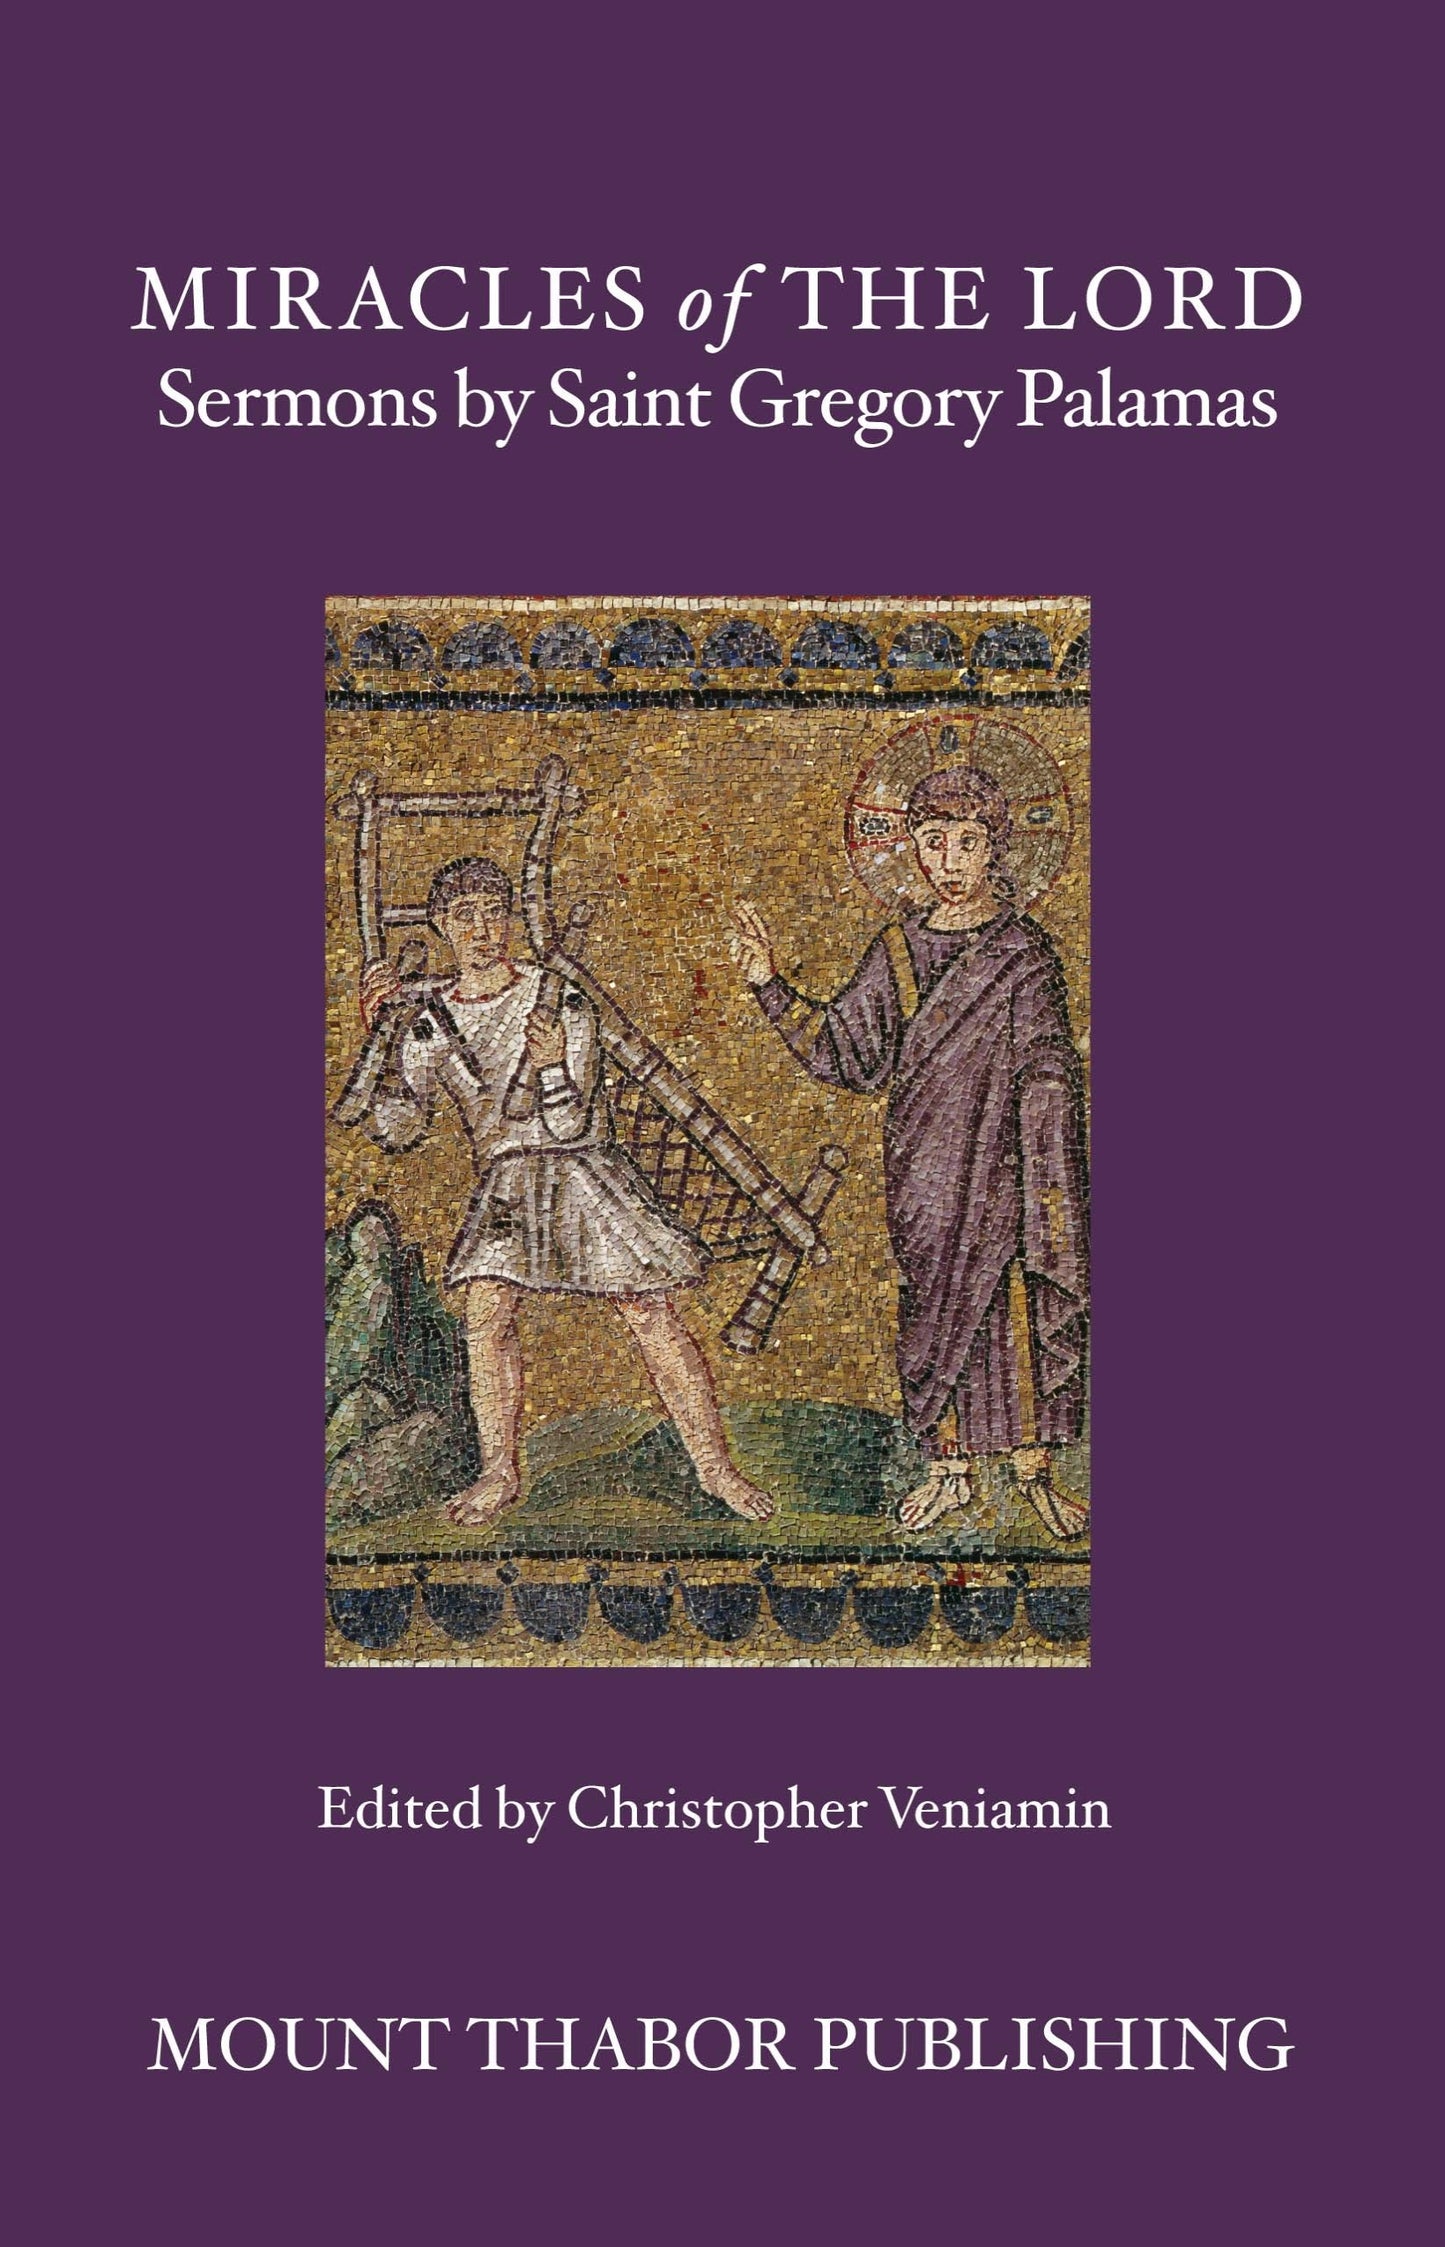 Front Cover of Miracles of the Lord: Sermons by Saint Gregory Palamas (Edited and Translated by Christopher Veniamin)